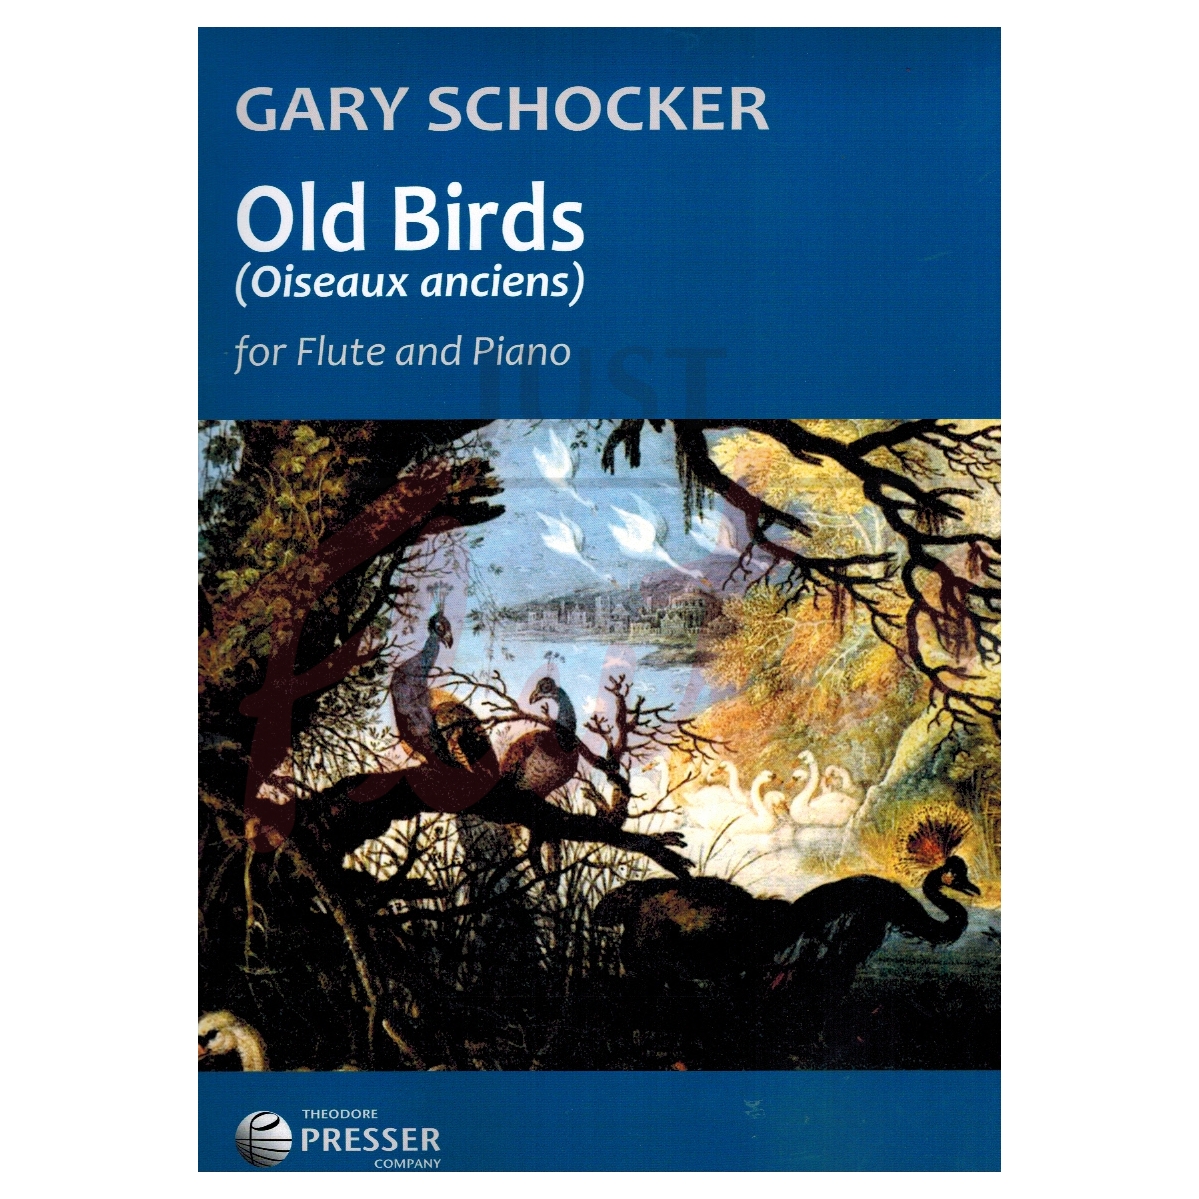 Old Birds (Oiseaux Anciens) for Flute and Piano